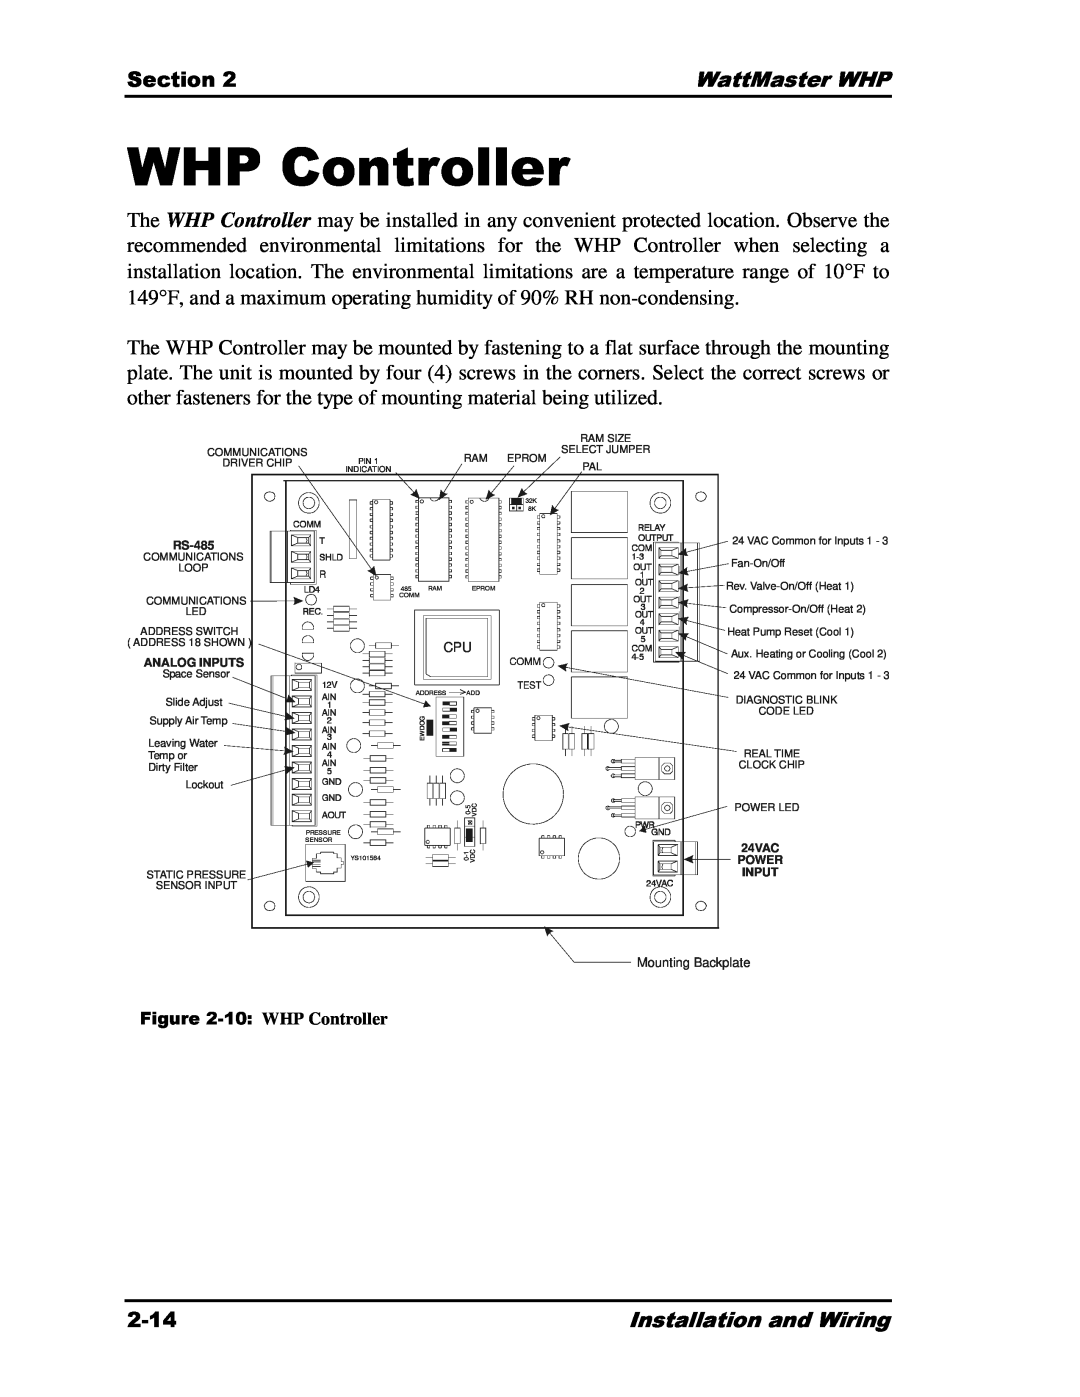 Heat Controller Water Source Heat Pump manual WHP Controller, PWRGND 24VAC, YS101564, AIN5, 4COM1COUT--RELAY5342153MUTPUT 